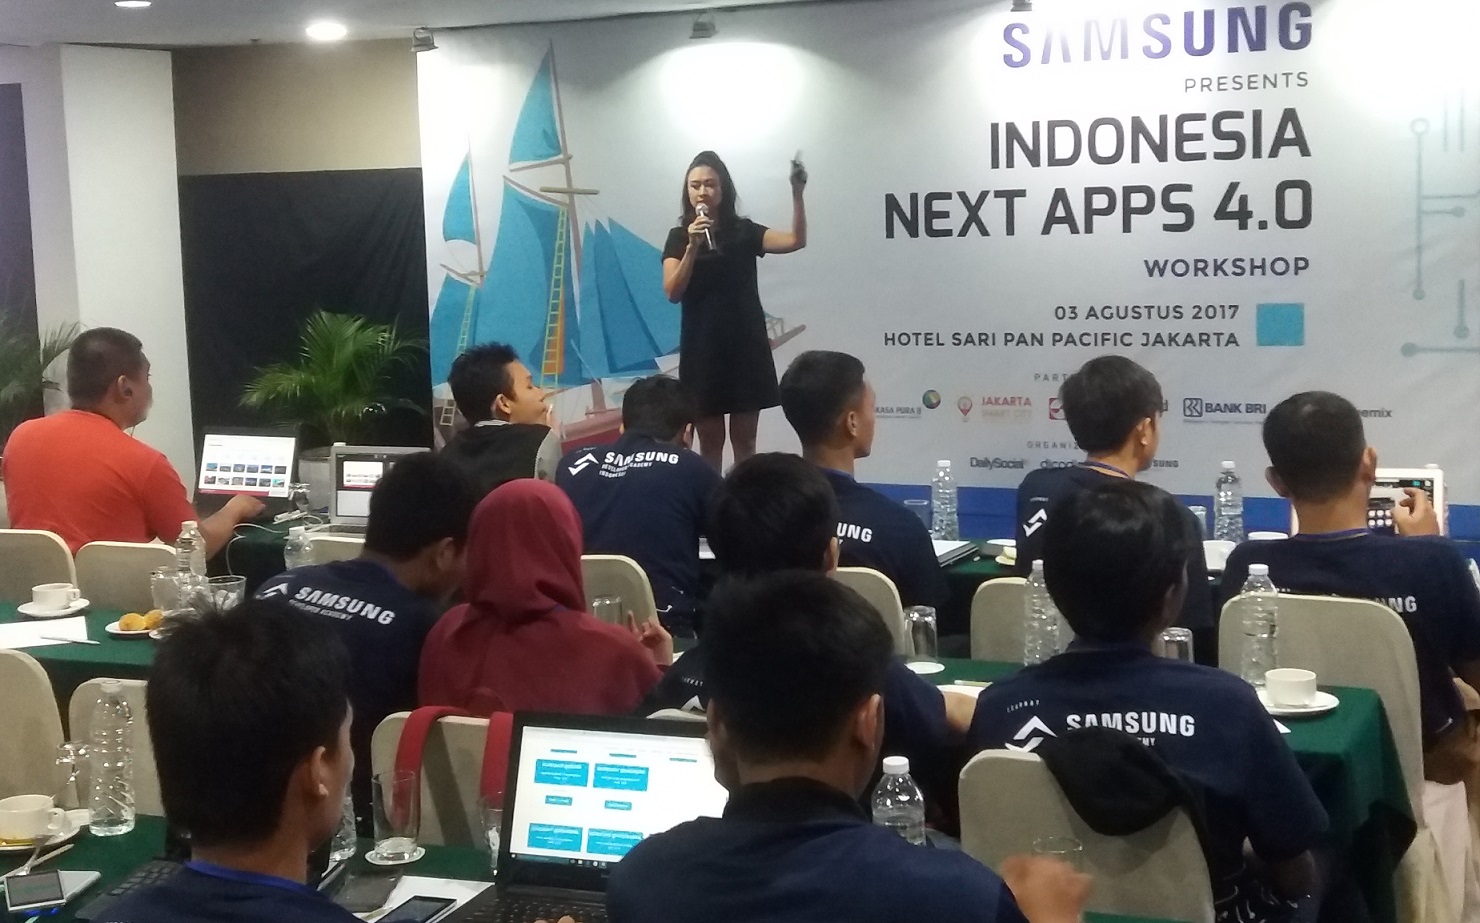 Sinar Mas Land and Samsung to host Indonesia Next Apps 4.0